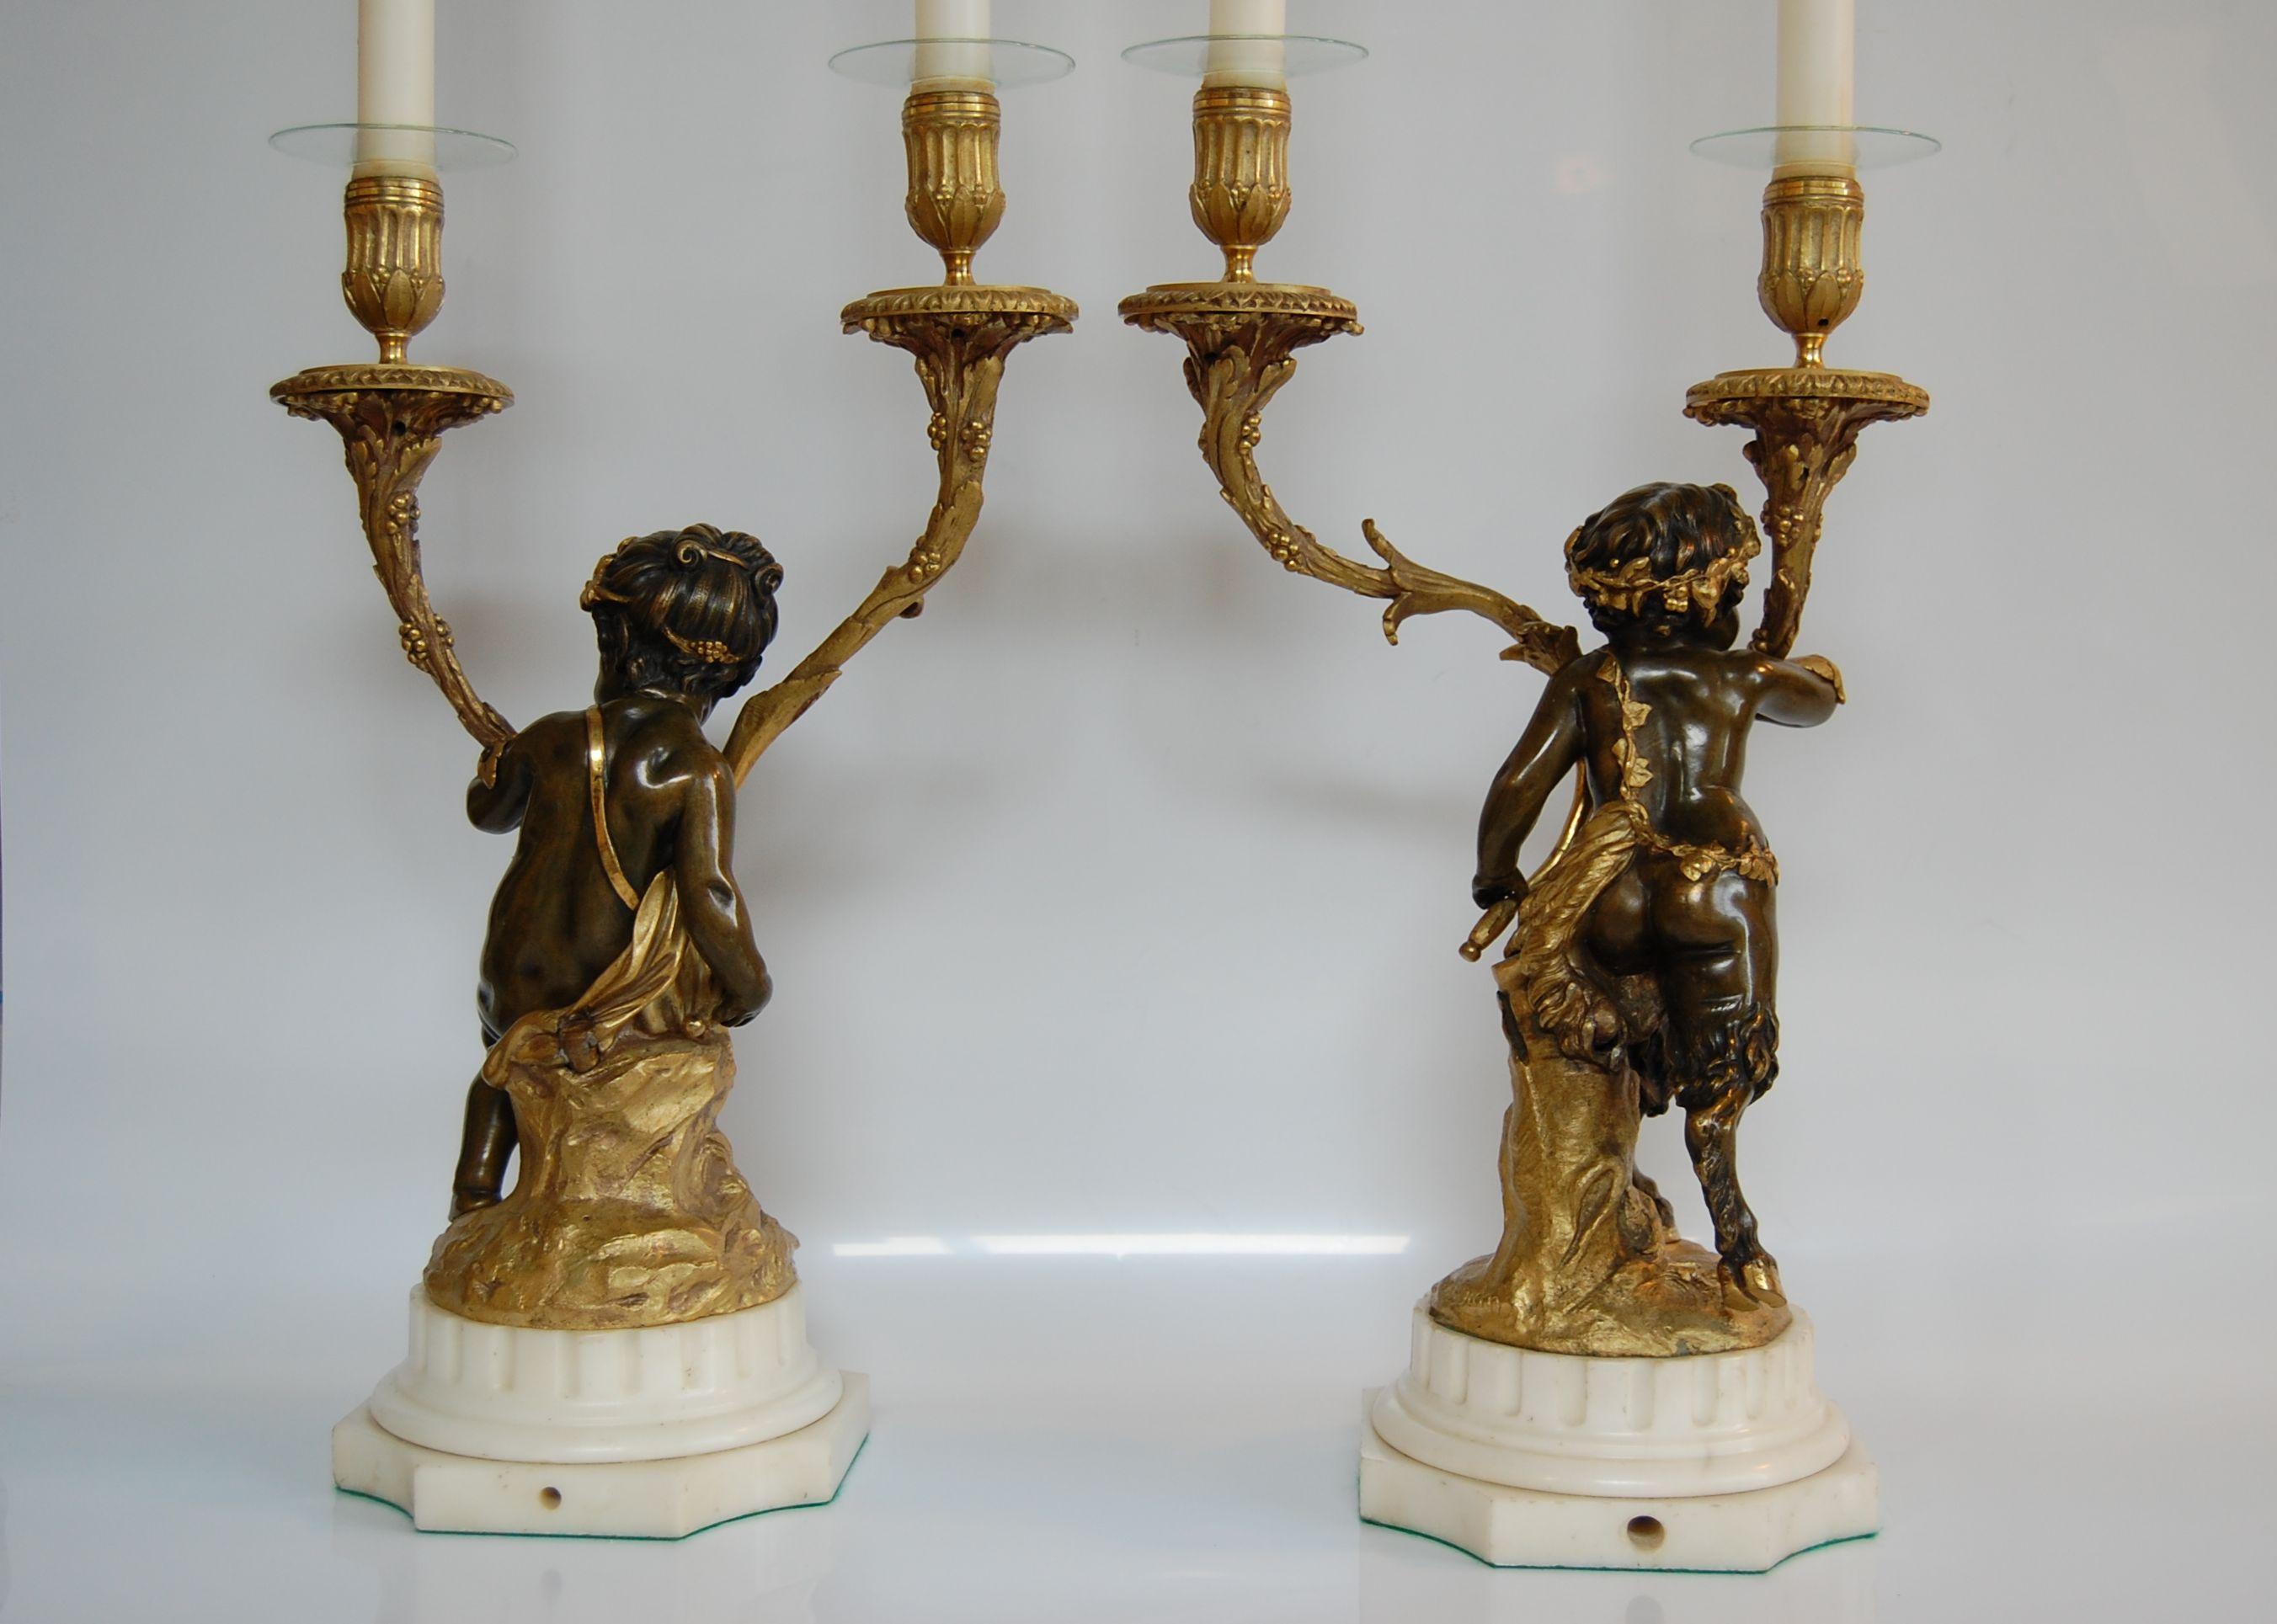 Hand-Carved Pr. Gilt Bronze & Marble Two-Light Candelabra, Signed Clodion Mid 19th. Century